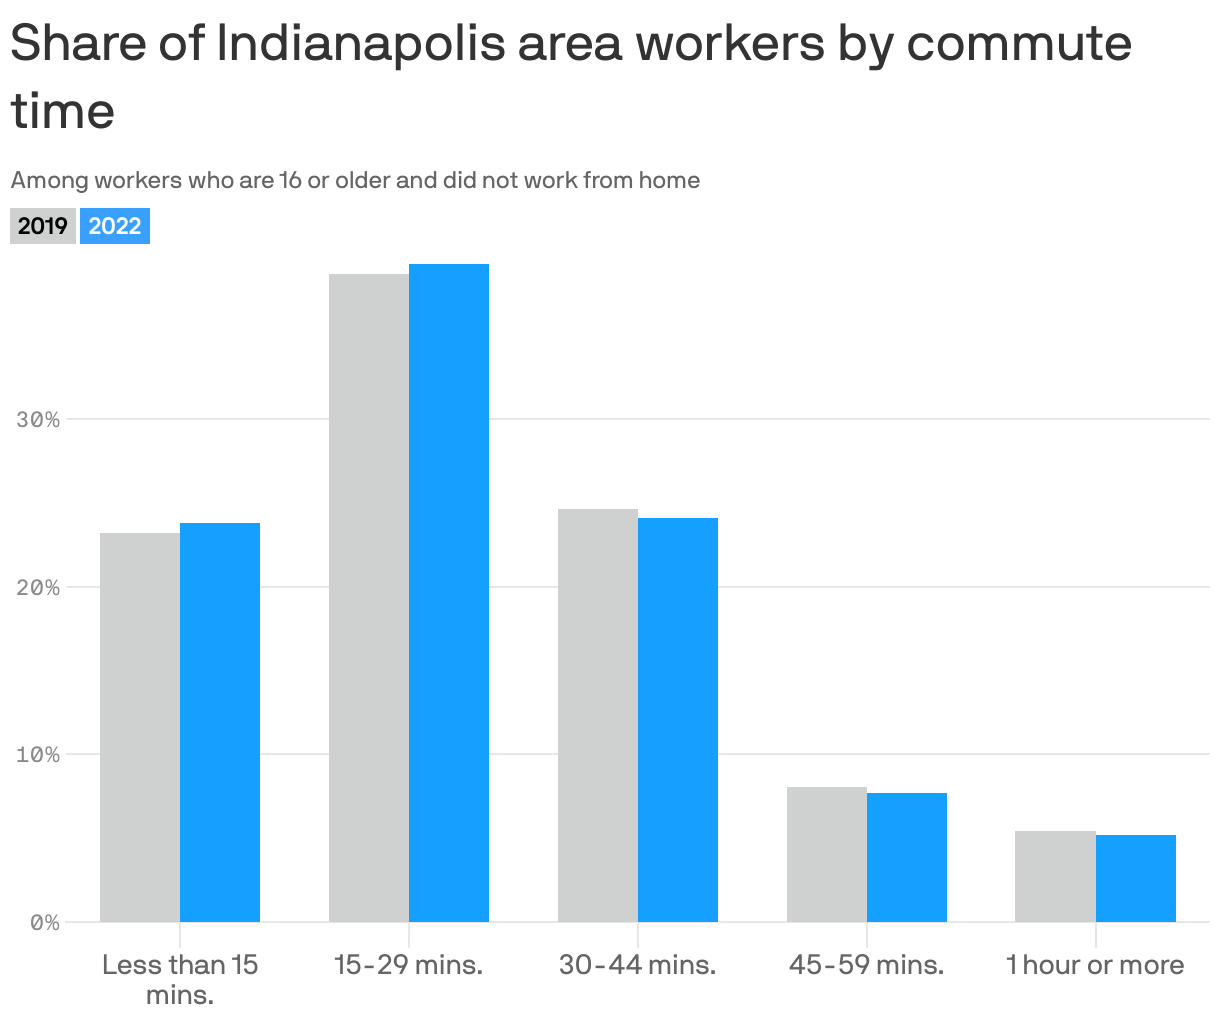 Share of Indianapolis area workers by commute time